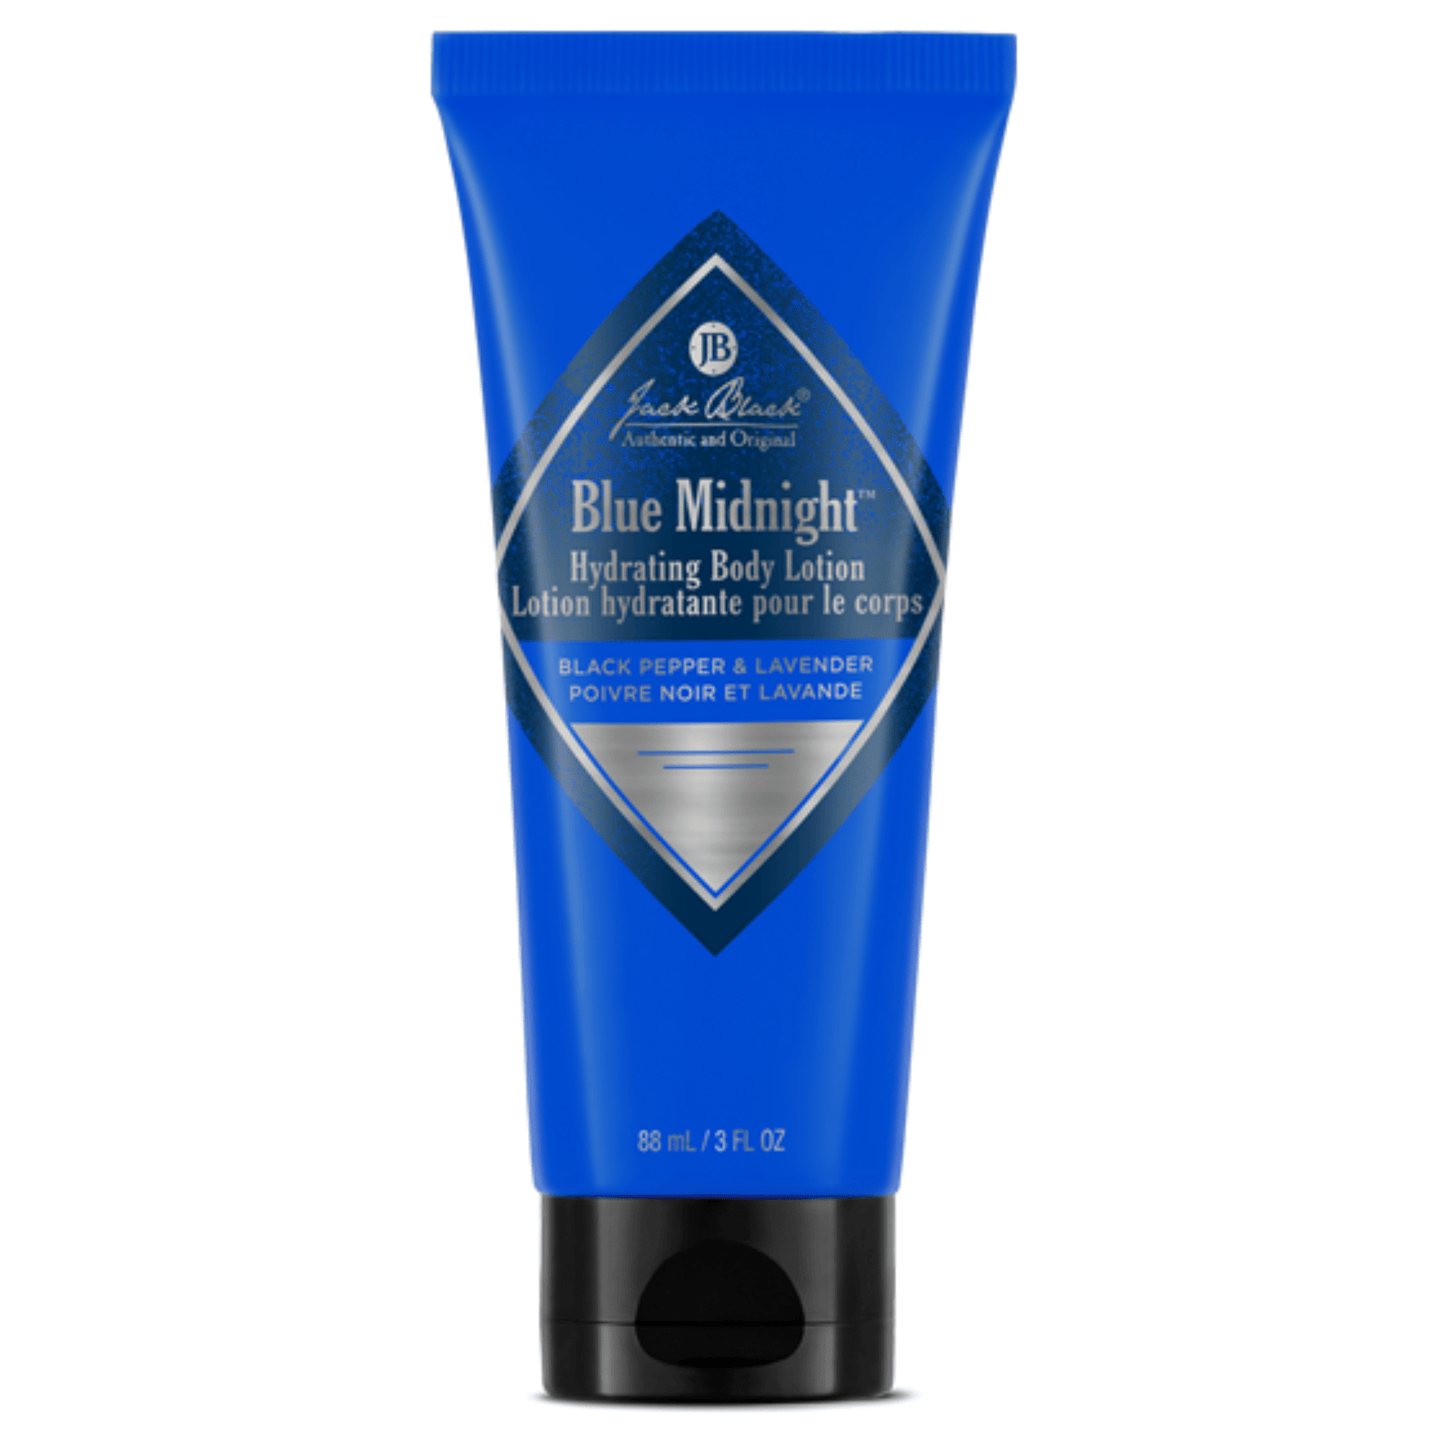 Primary Image of Blue Midnight Body Lotion